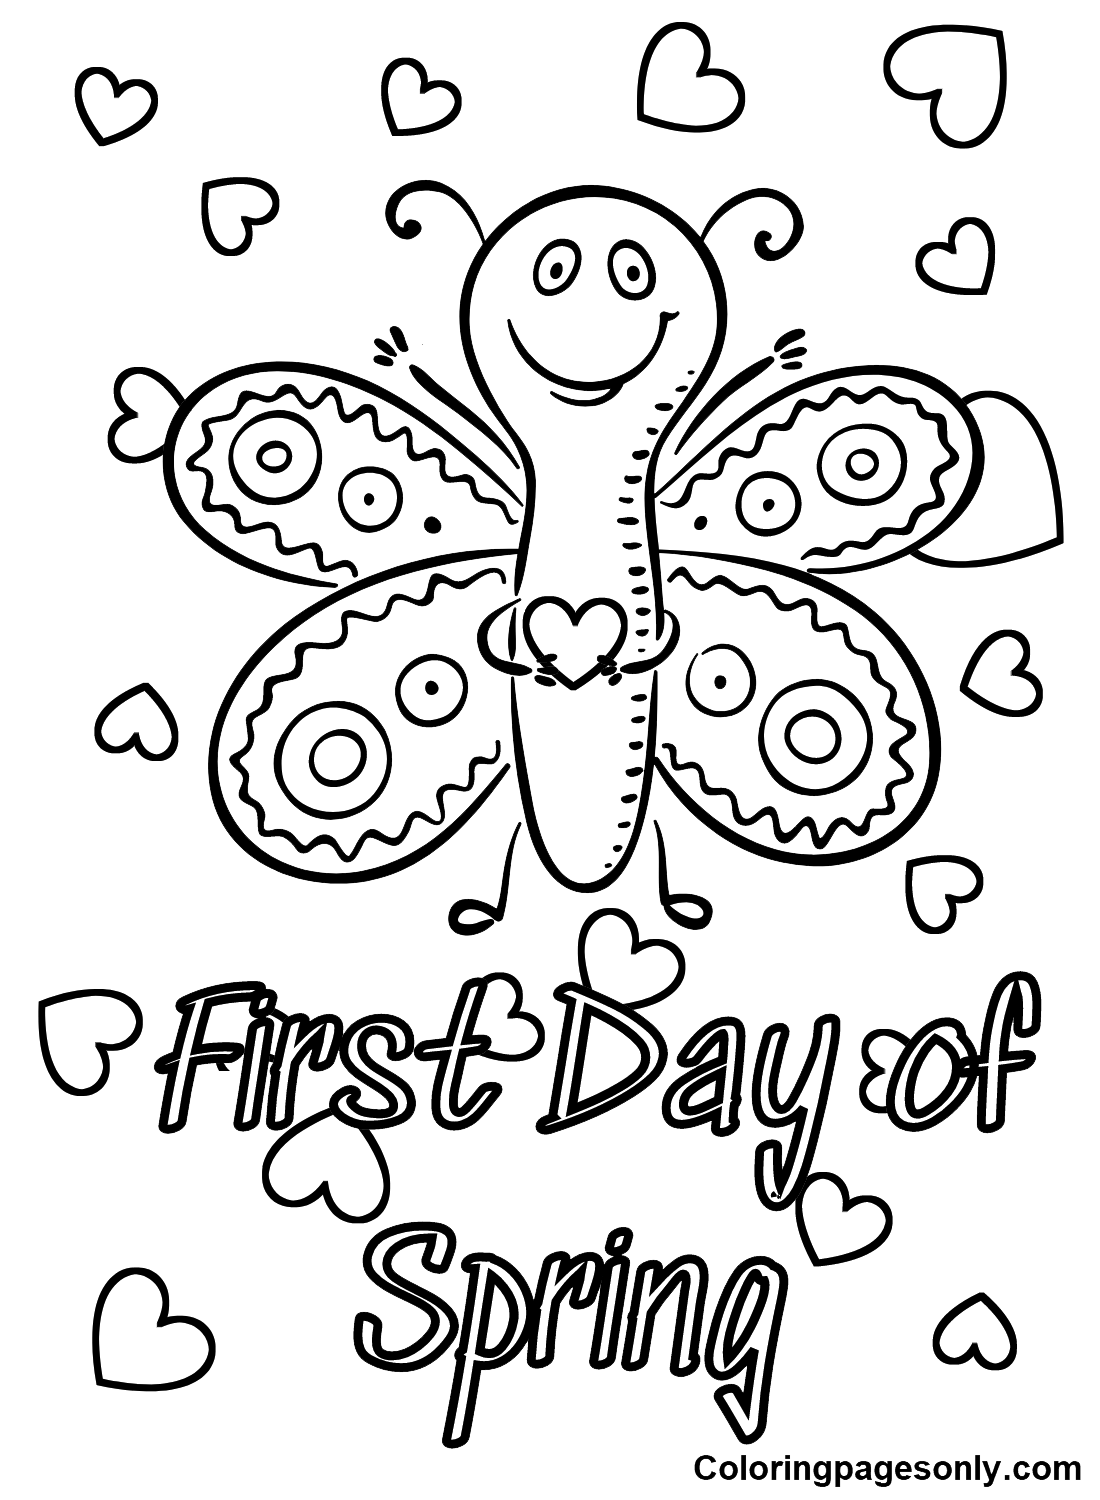 Free First Day of Spring Coloring Page